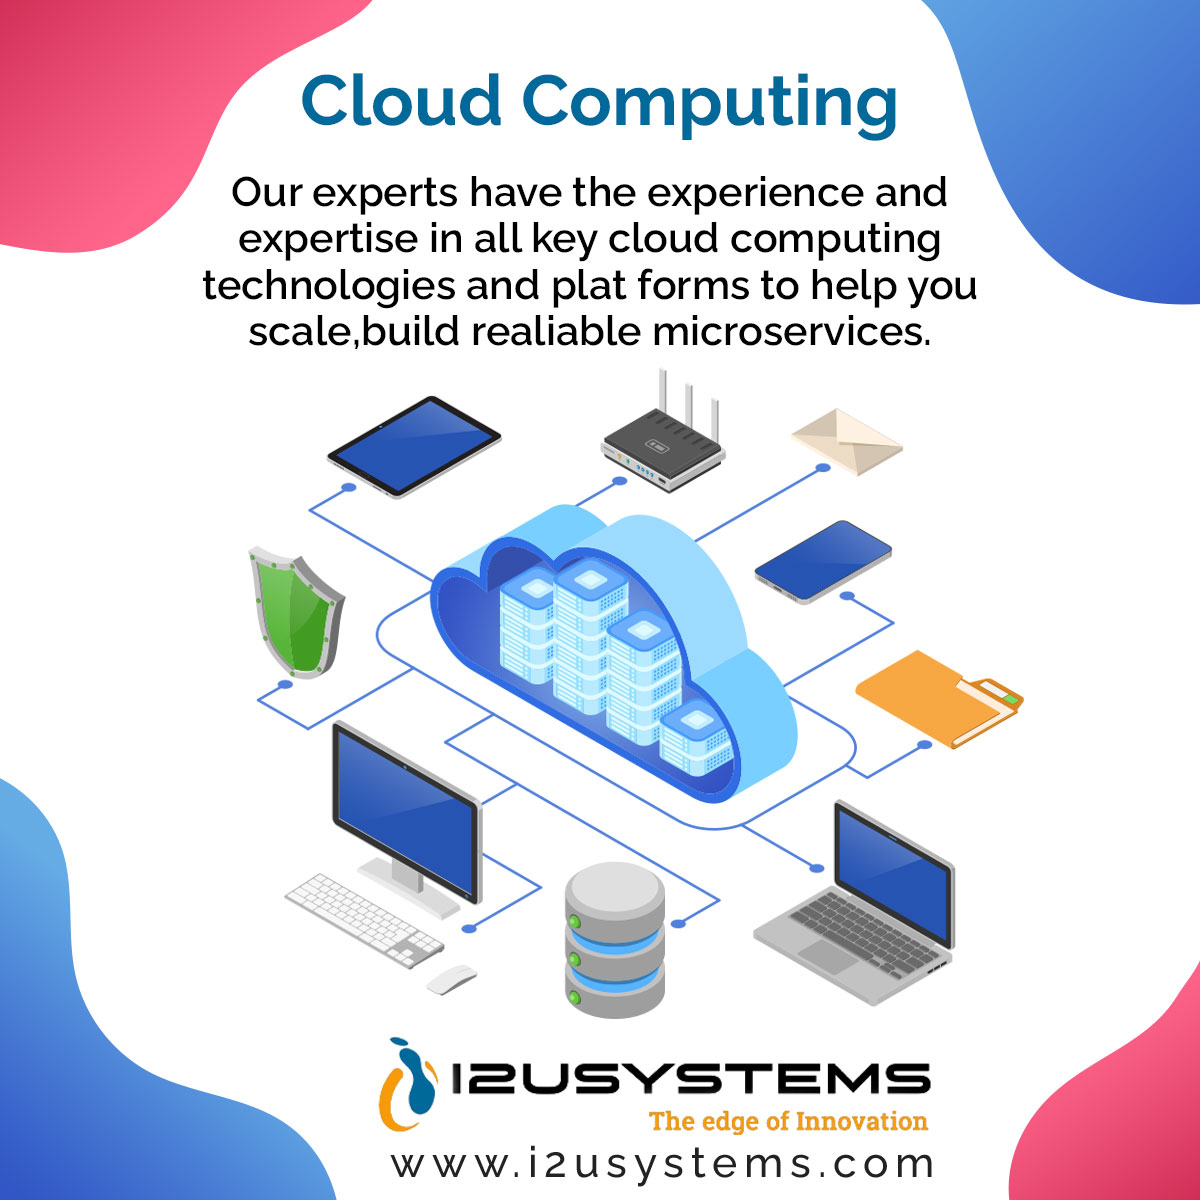 Cloud Computing Our experts have the experience and expertise in all key cloud computing technologies and plat forms to help you scale,build realiable microservices. #i2usystems #c2crequirements #w2jobs #directclient #technologies #realiable #microservices #scale #experts